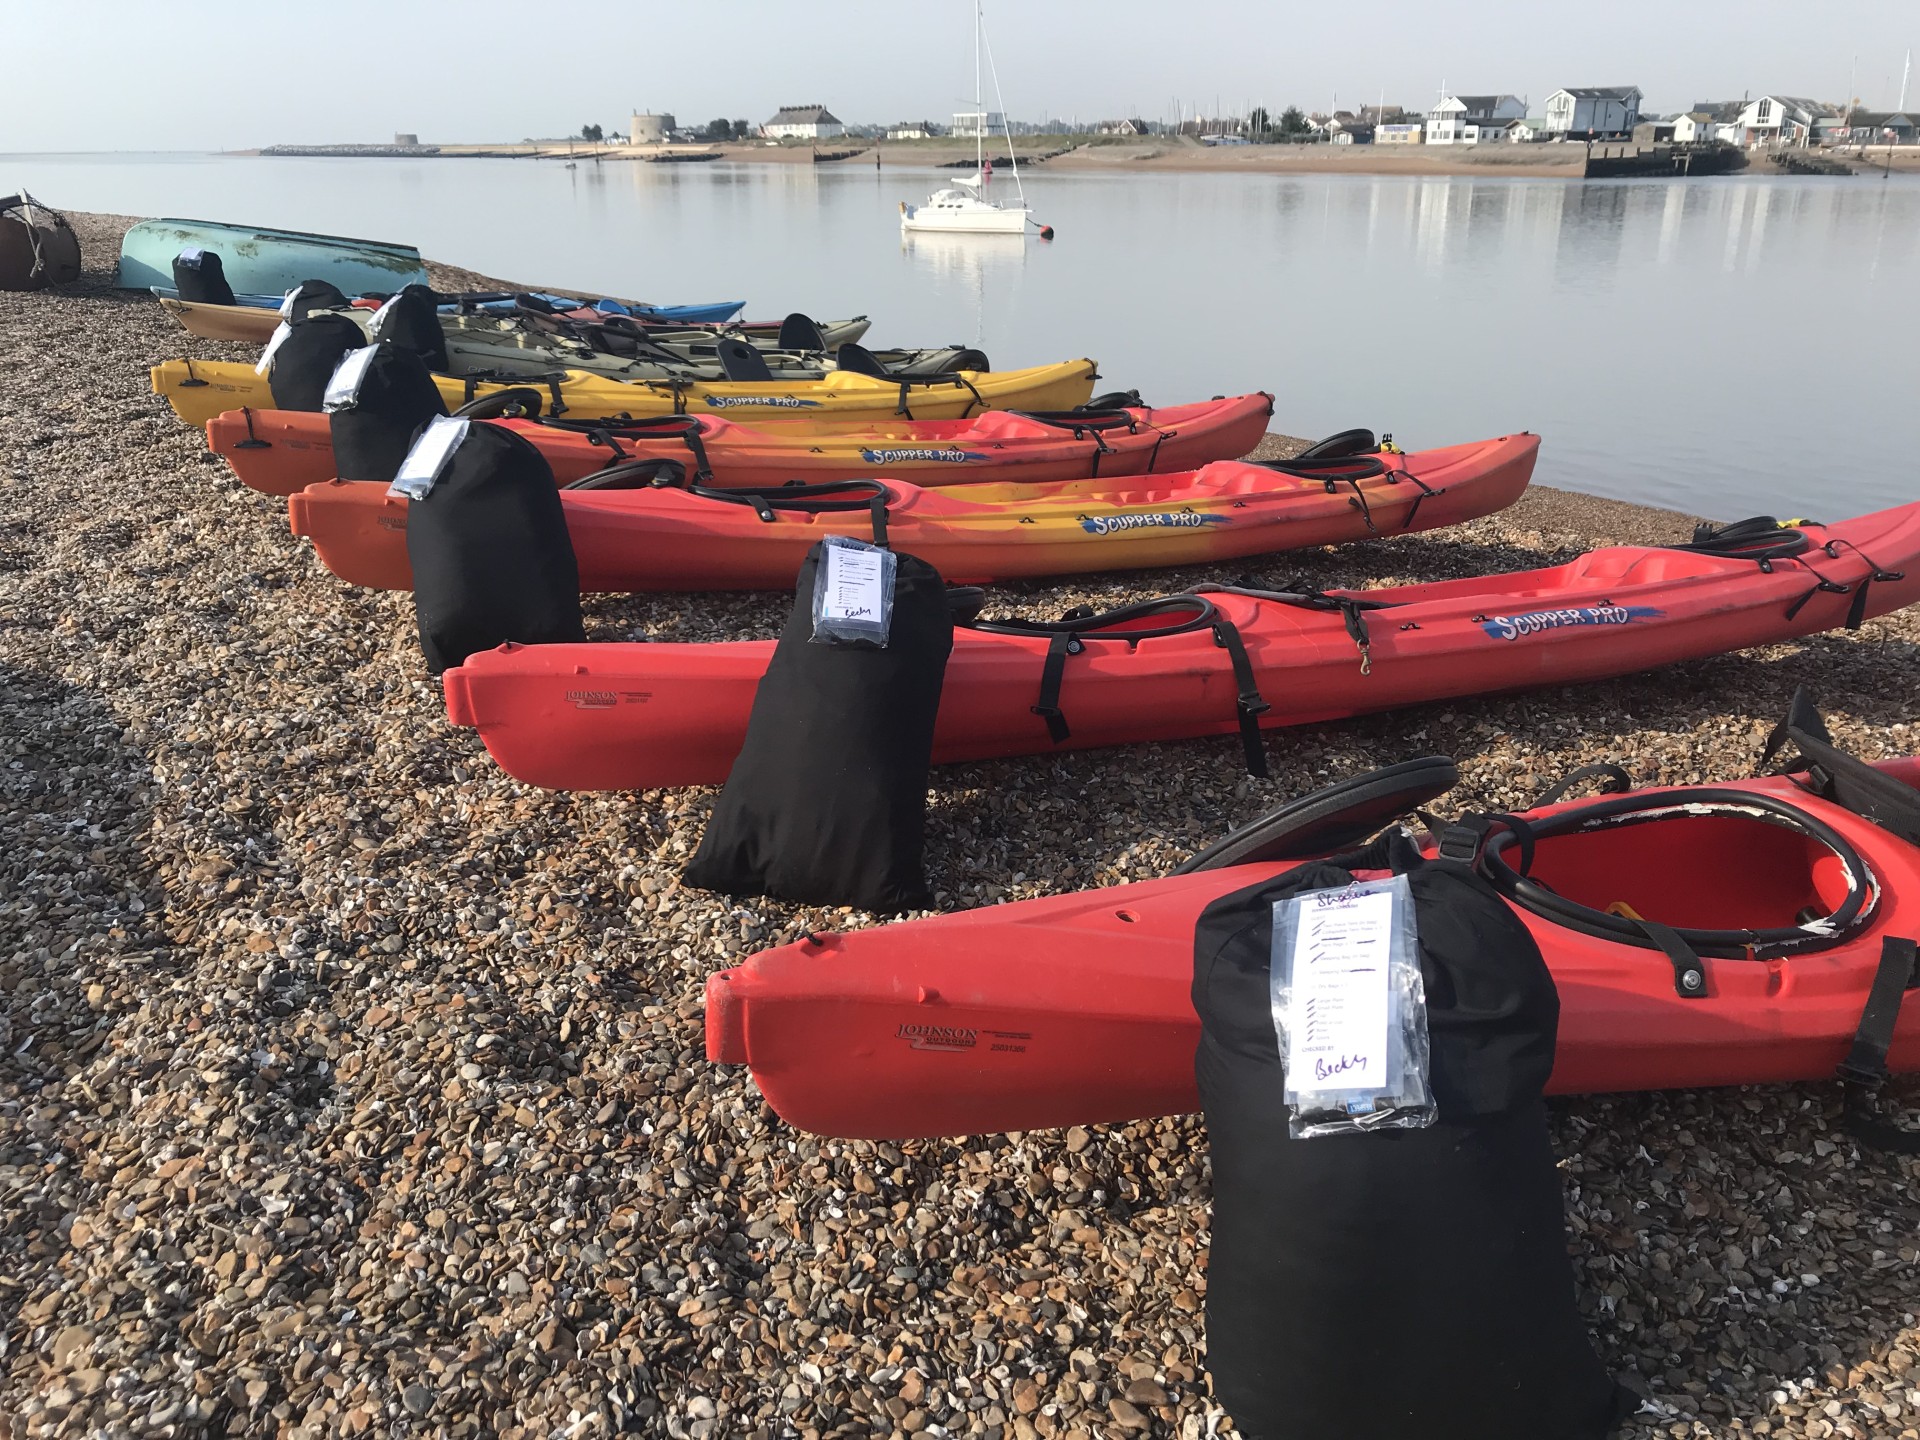 Sit-on-top kayaks ready to launch for the popular Suffolk weekend wild camp and kayaking event with NOMAD Sea Kayaking.